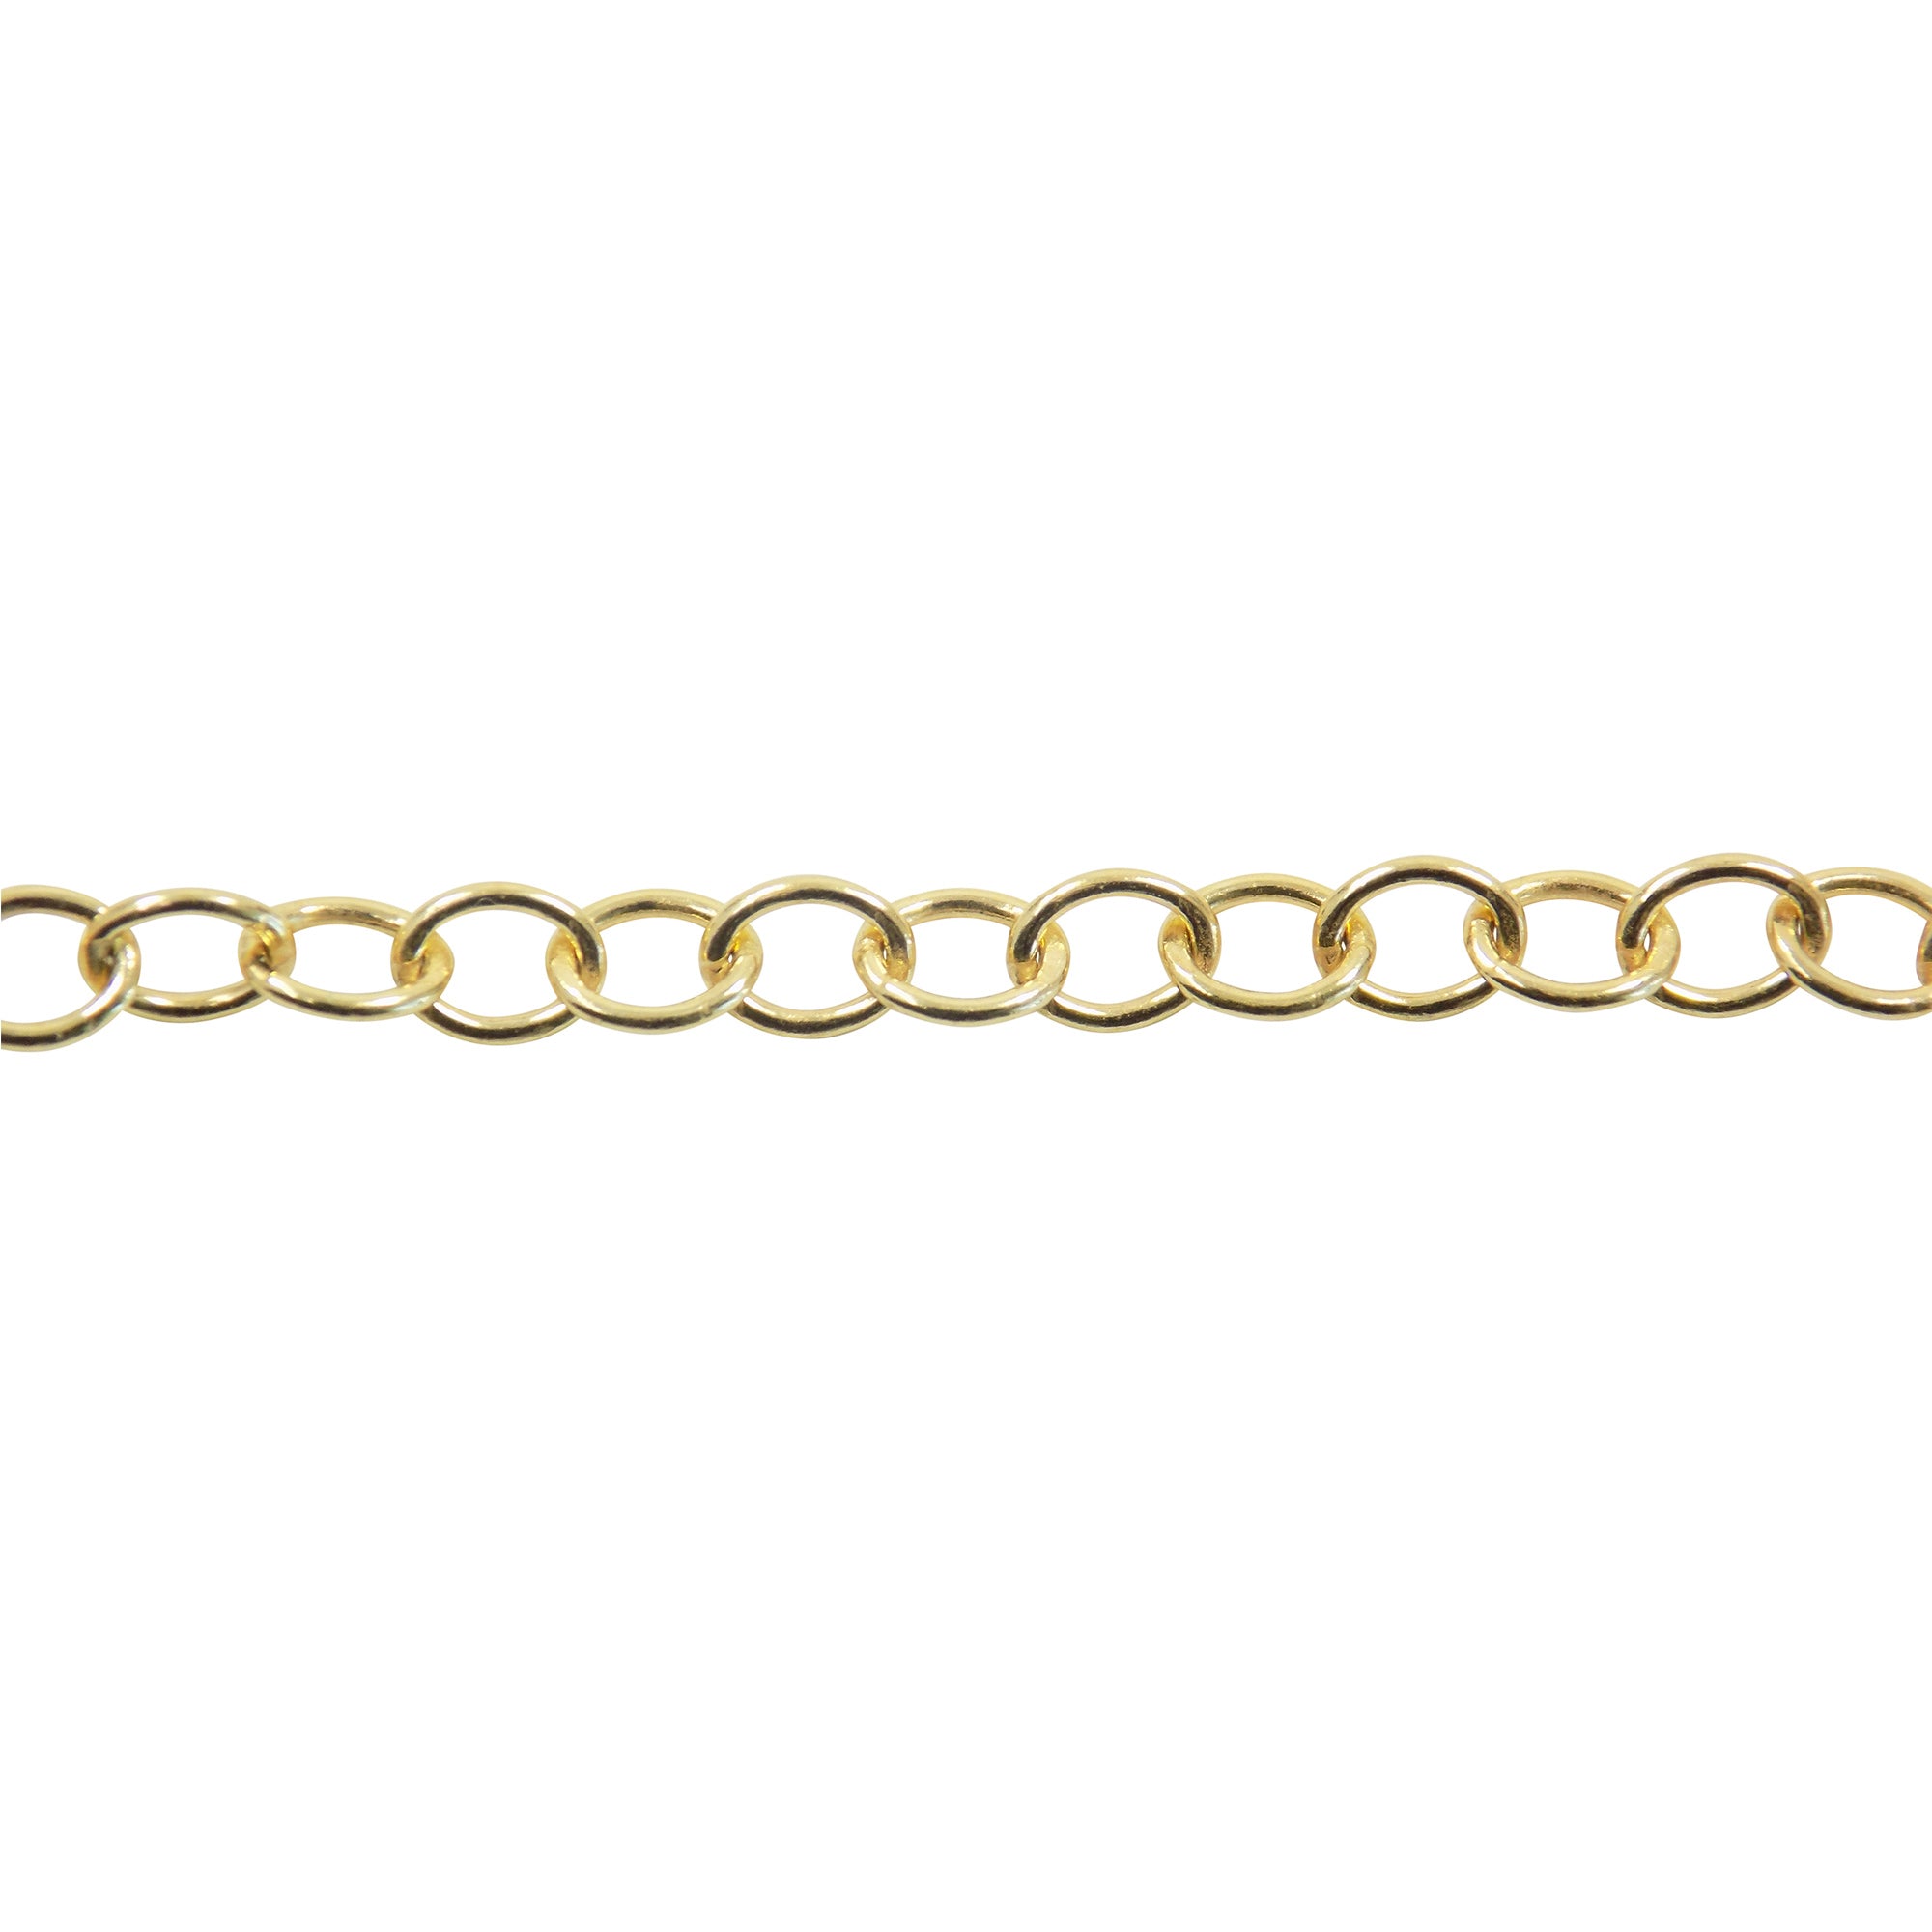 Oval Extender Chain, Cable Unfinished Chain 2.5mm x 3.5mm 22K Gold Plated over 925 Sterling Silve